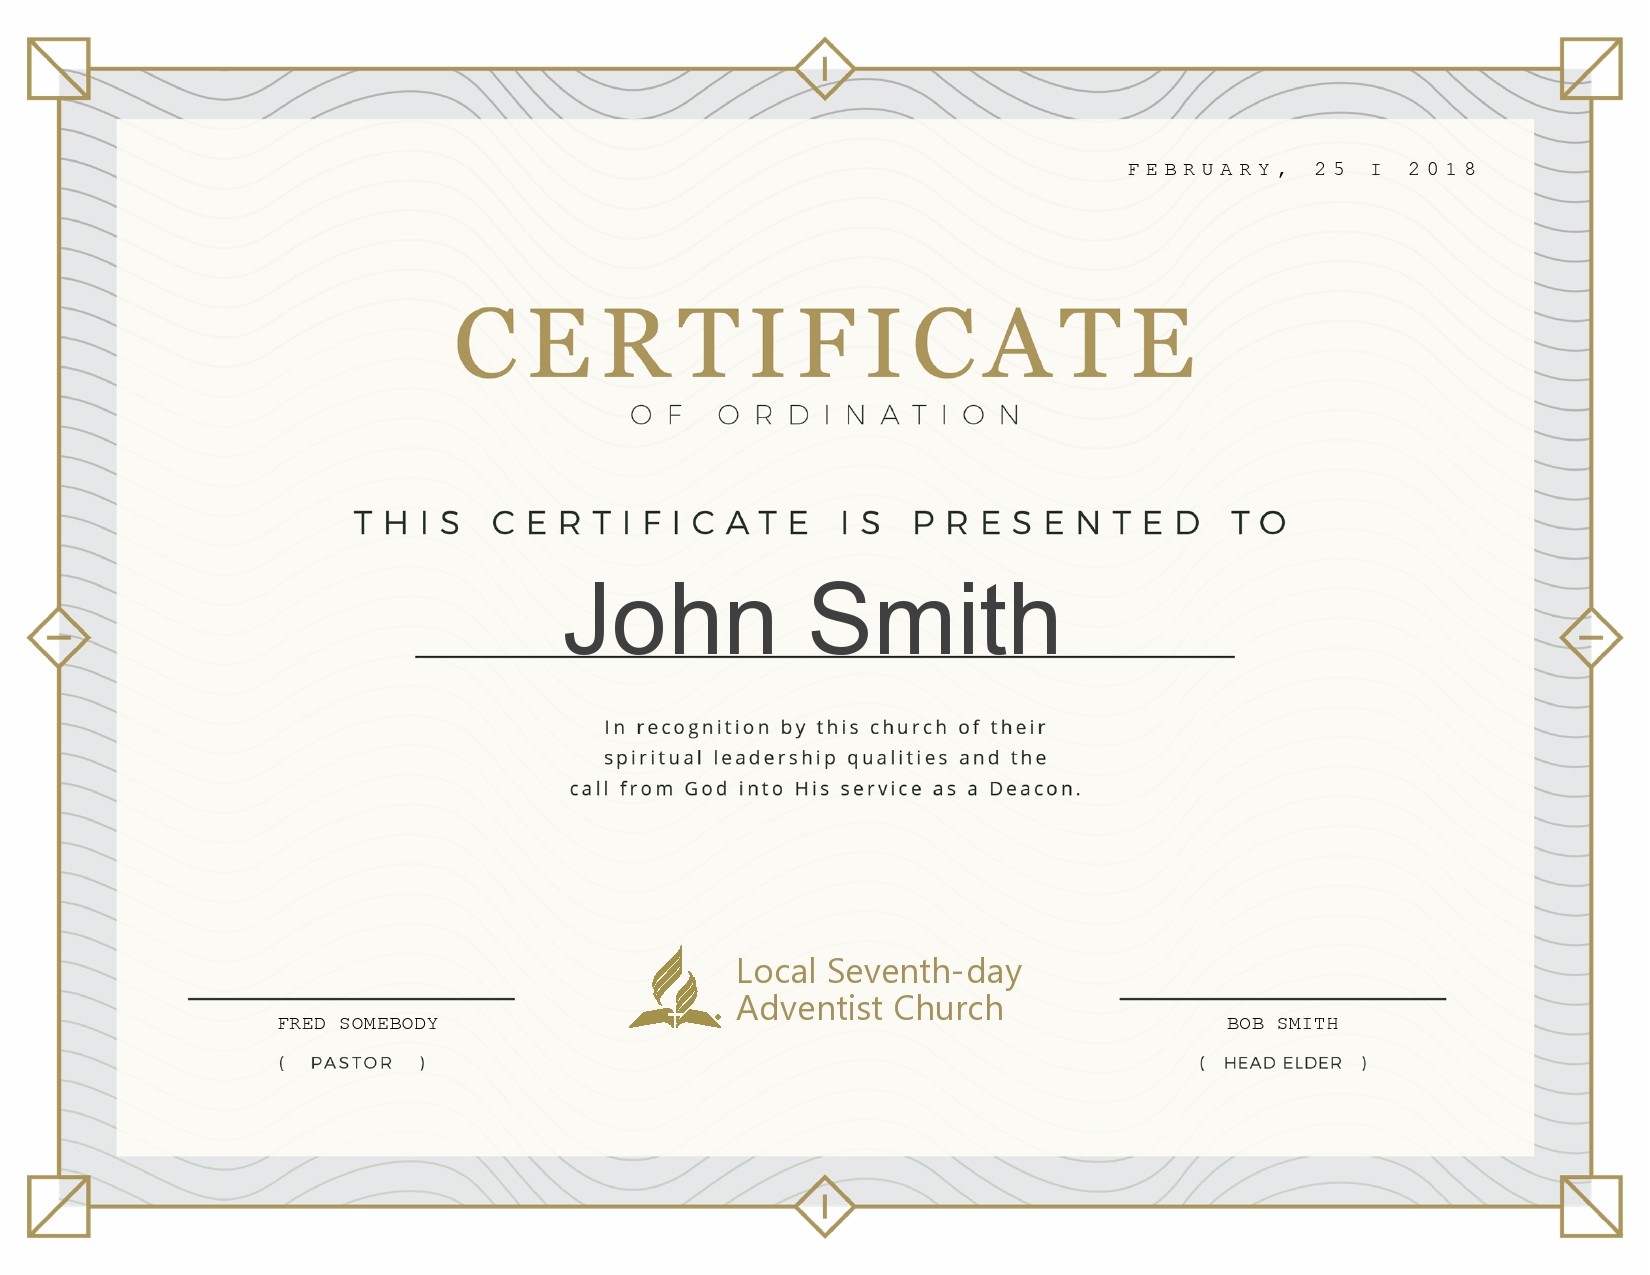 Gospel Ministry Certificate Template Printable Ordained Minister Minimalist Certificate Download Editable Certificate of Ordination